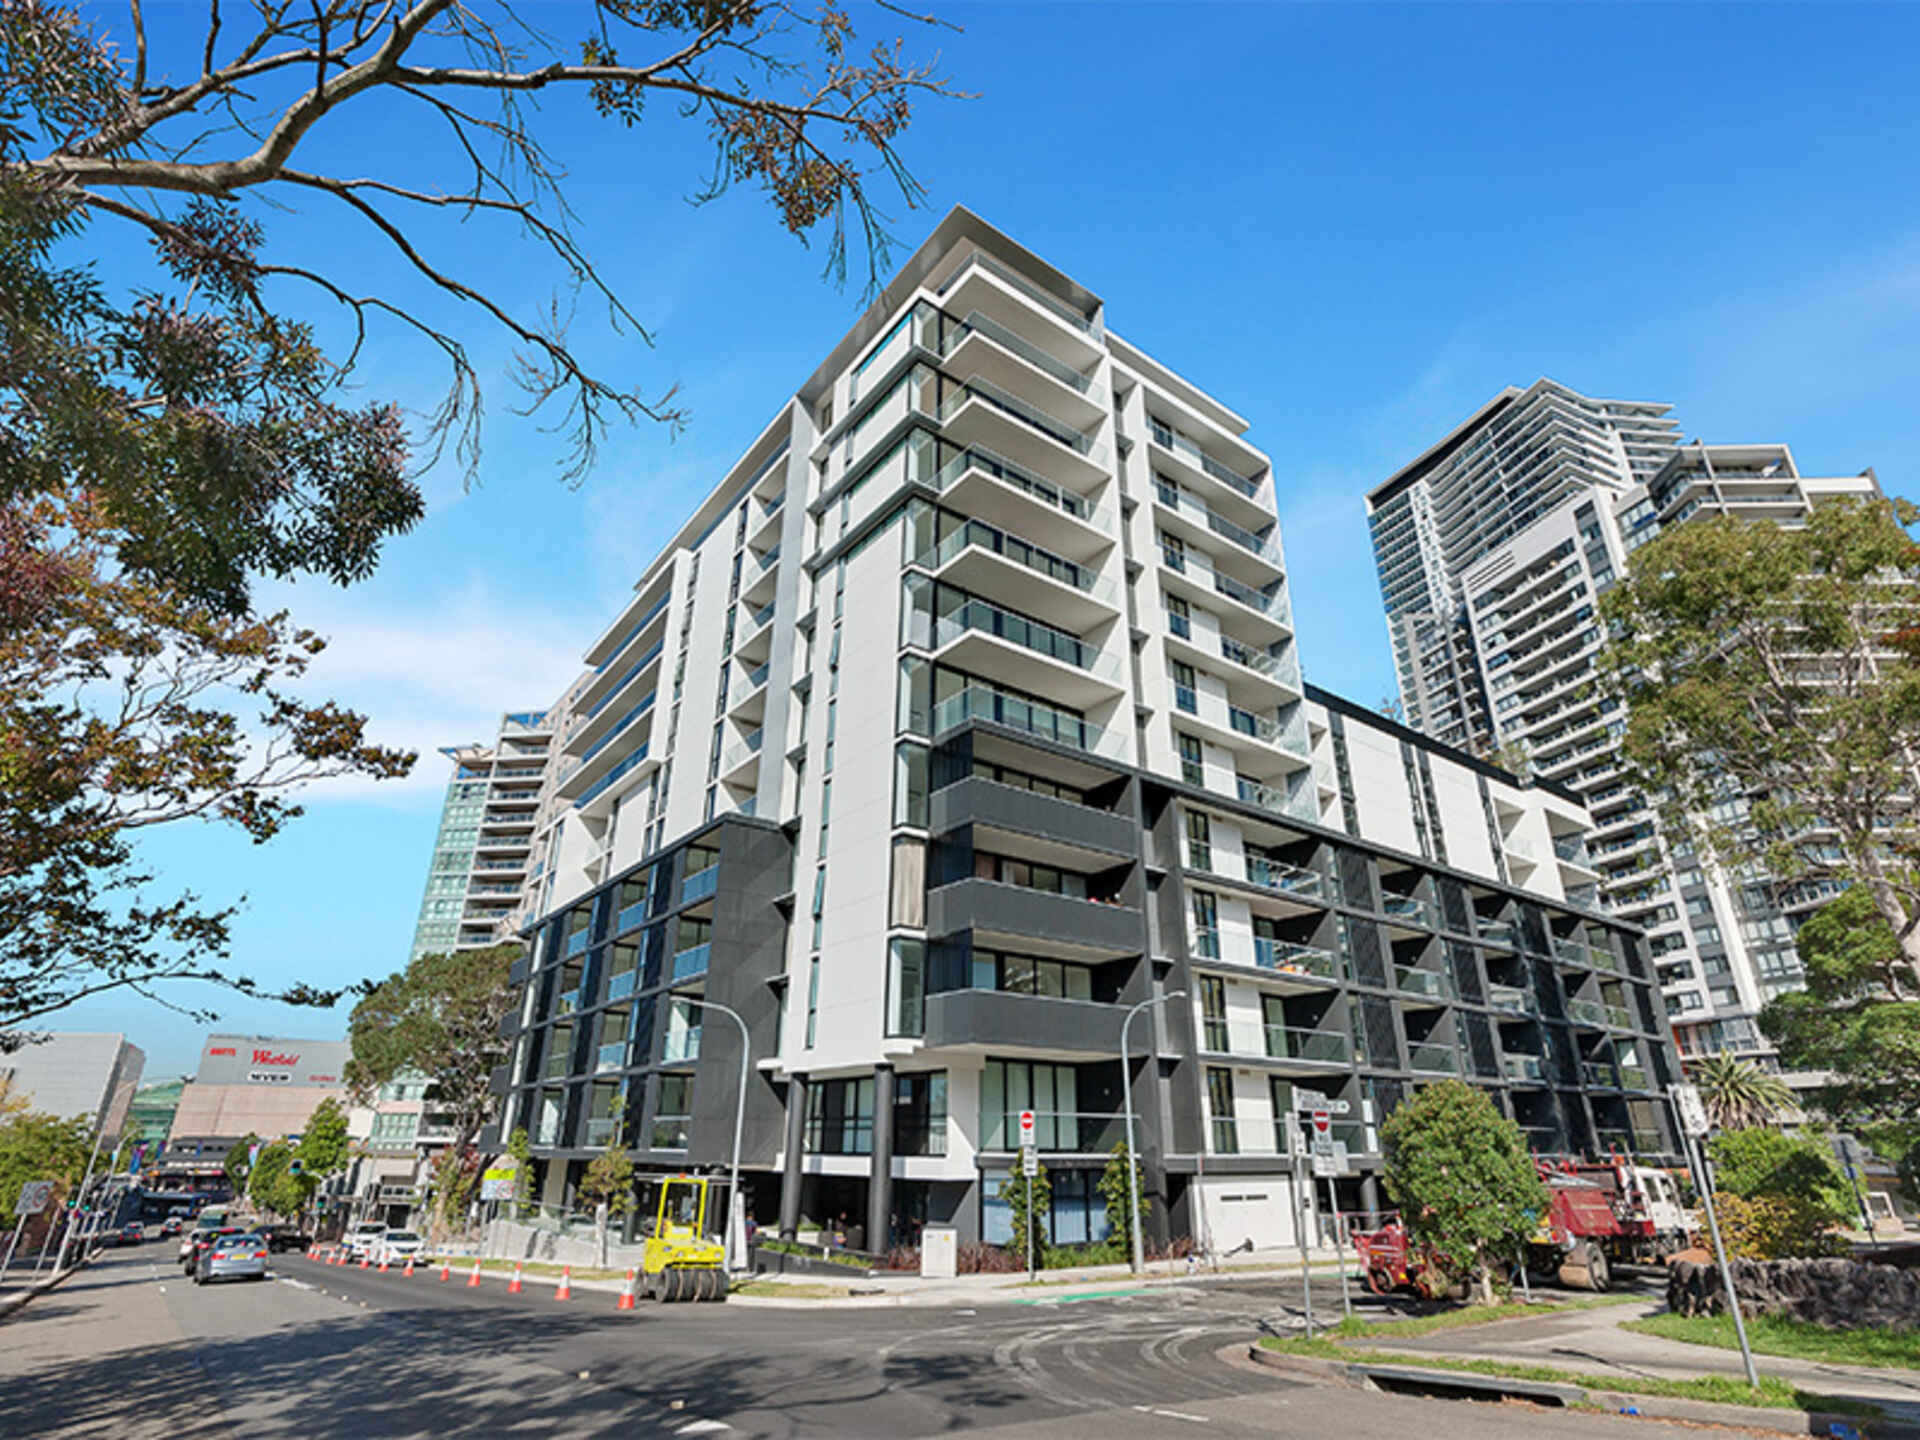  502/28-36 Anderson St Chatswood